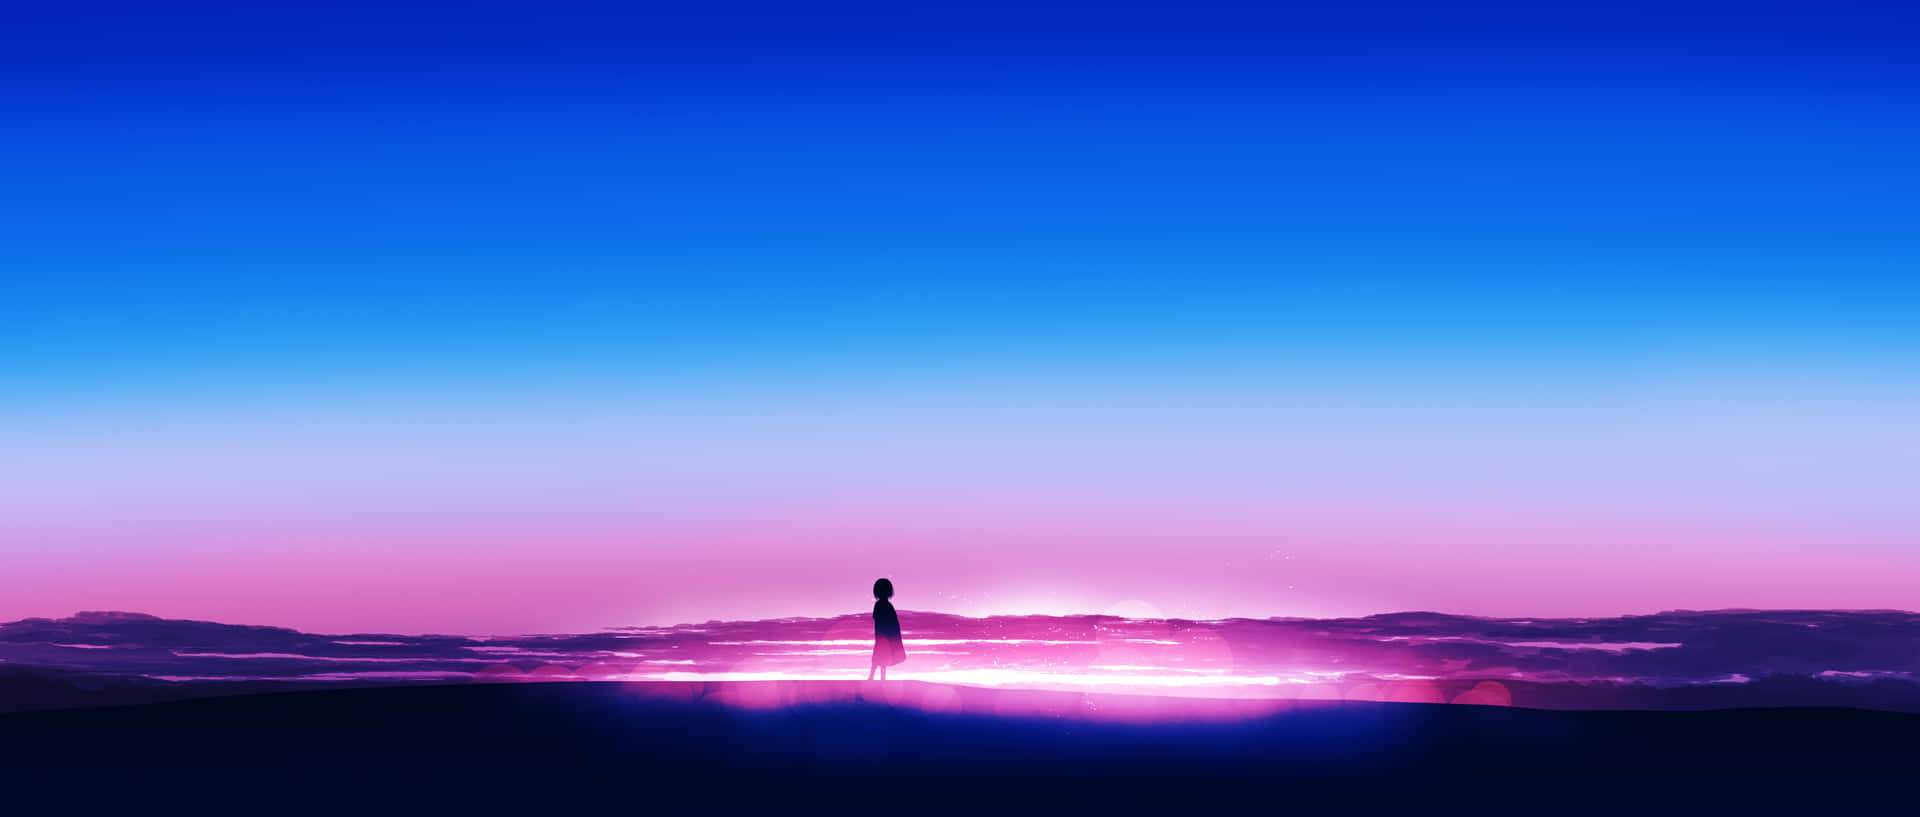 Blue And Purple Sunset With A Standing Person Wallpaper